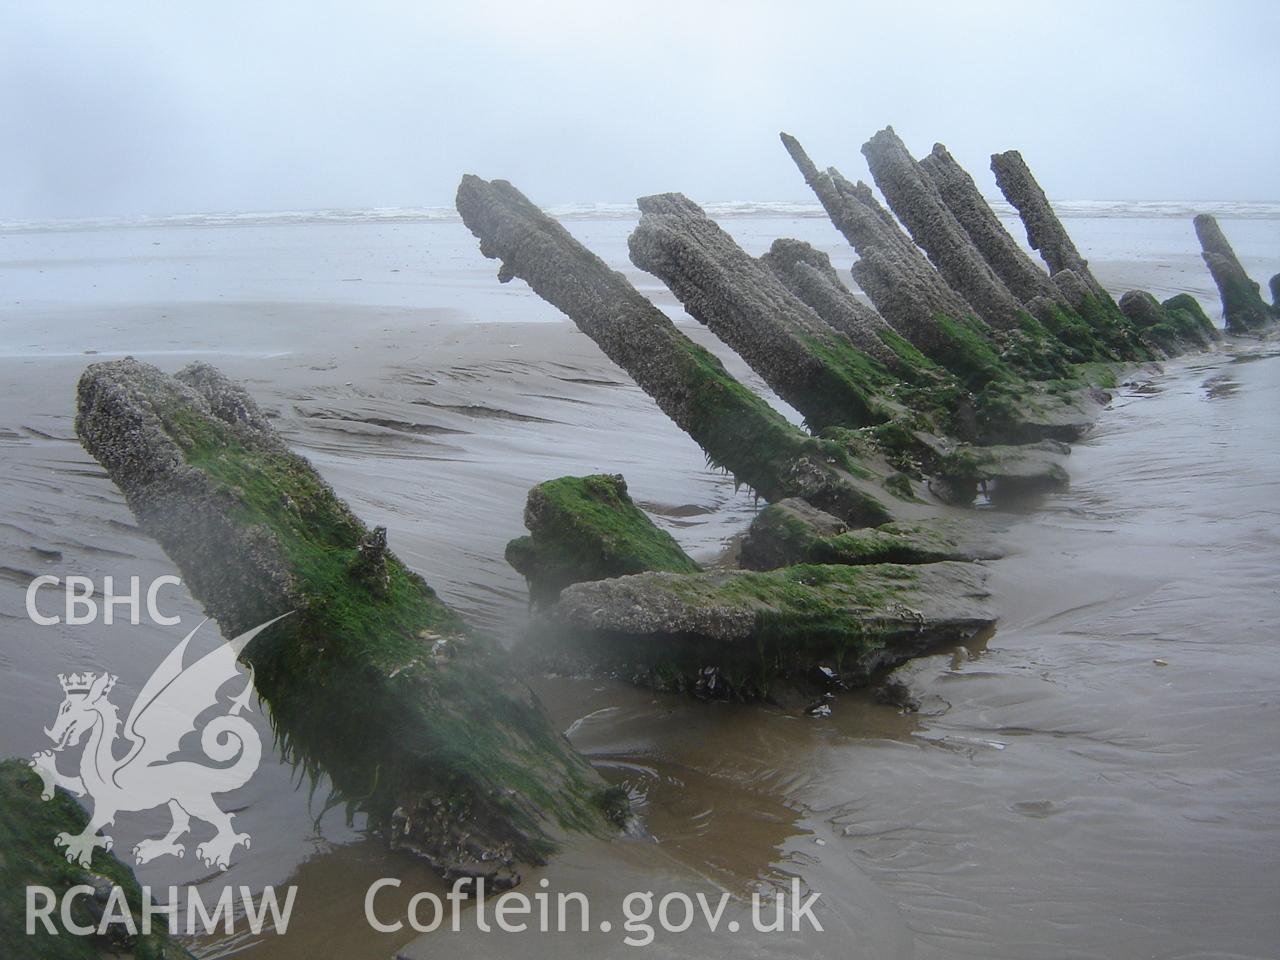 Digital photo showing unnamed wreck at Cefn Sidan, produced by Ian Cundy, July 2010.